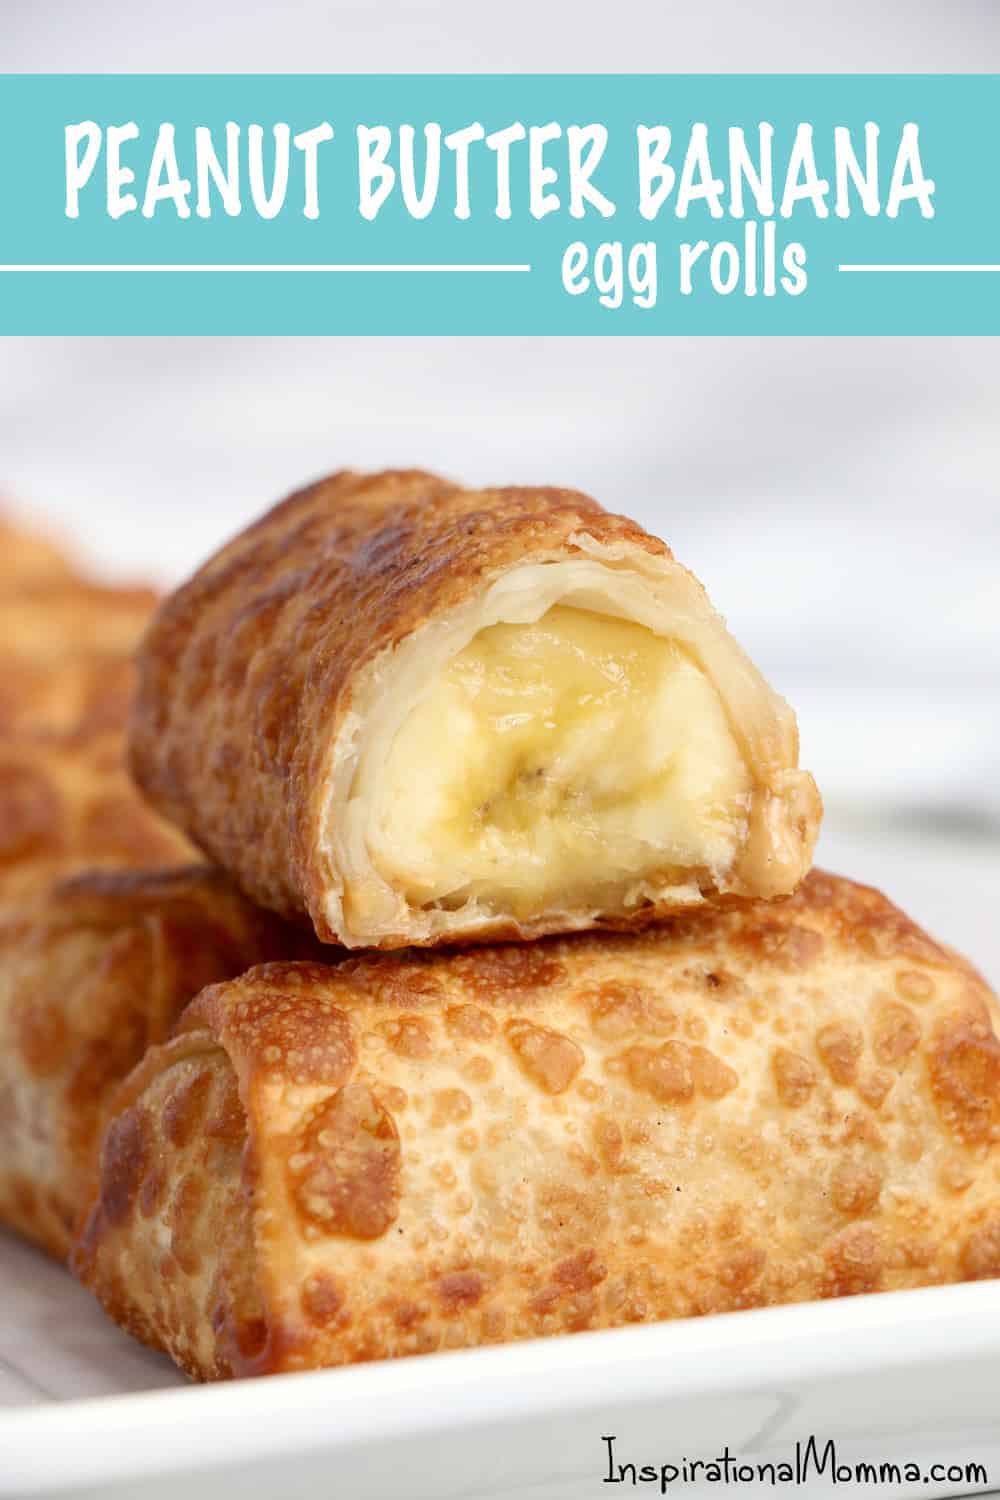 This Peanut Butter Banana Egg Roll Recipe is amazing! A crispy egg roll wrapper filled with creamy peanut butter and a sweet banana makes a perfect dessert! #InspirationalMomma #EggRollRecipe #PeanutButter #Banana #PeanutButterBanana #EggRolls #Recipe #Dessert #Desserts